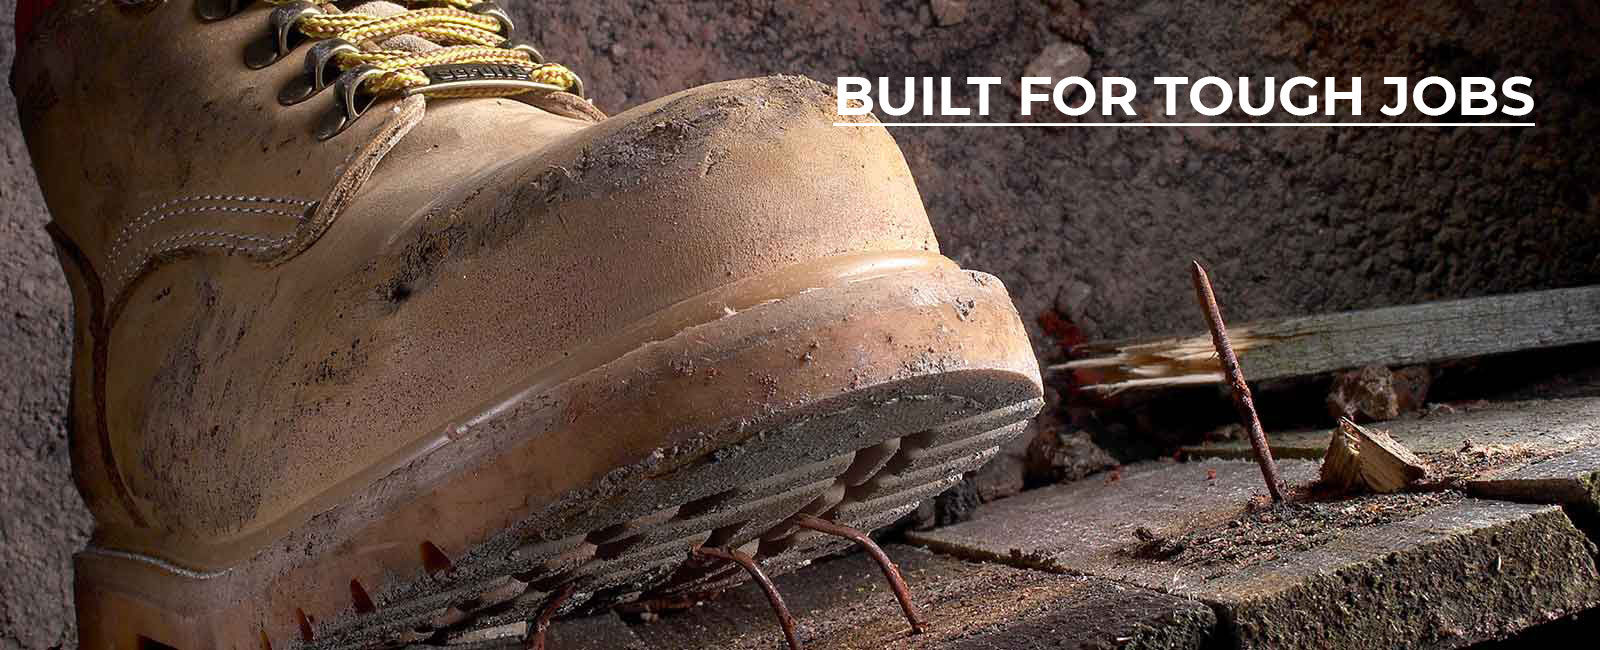 Safety Shoes Manufacturers in Bangalore